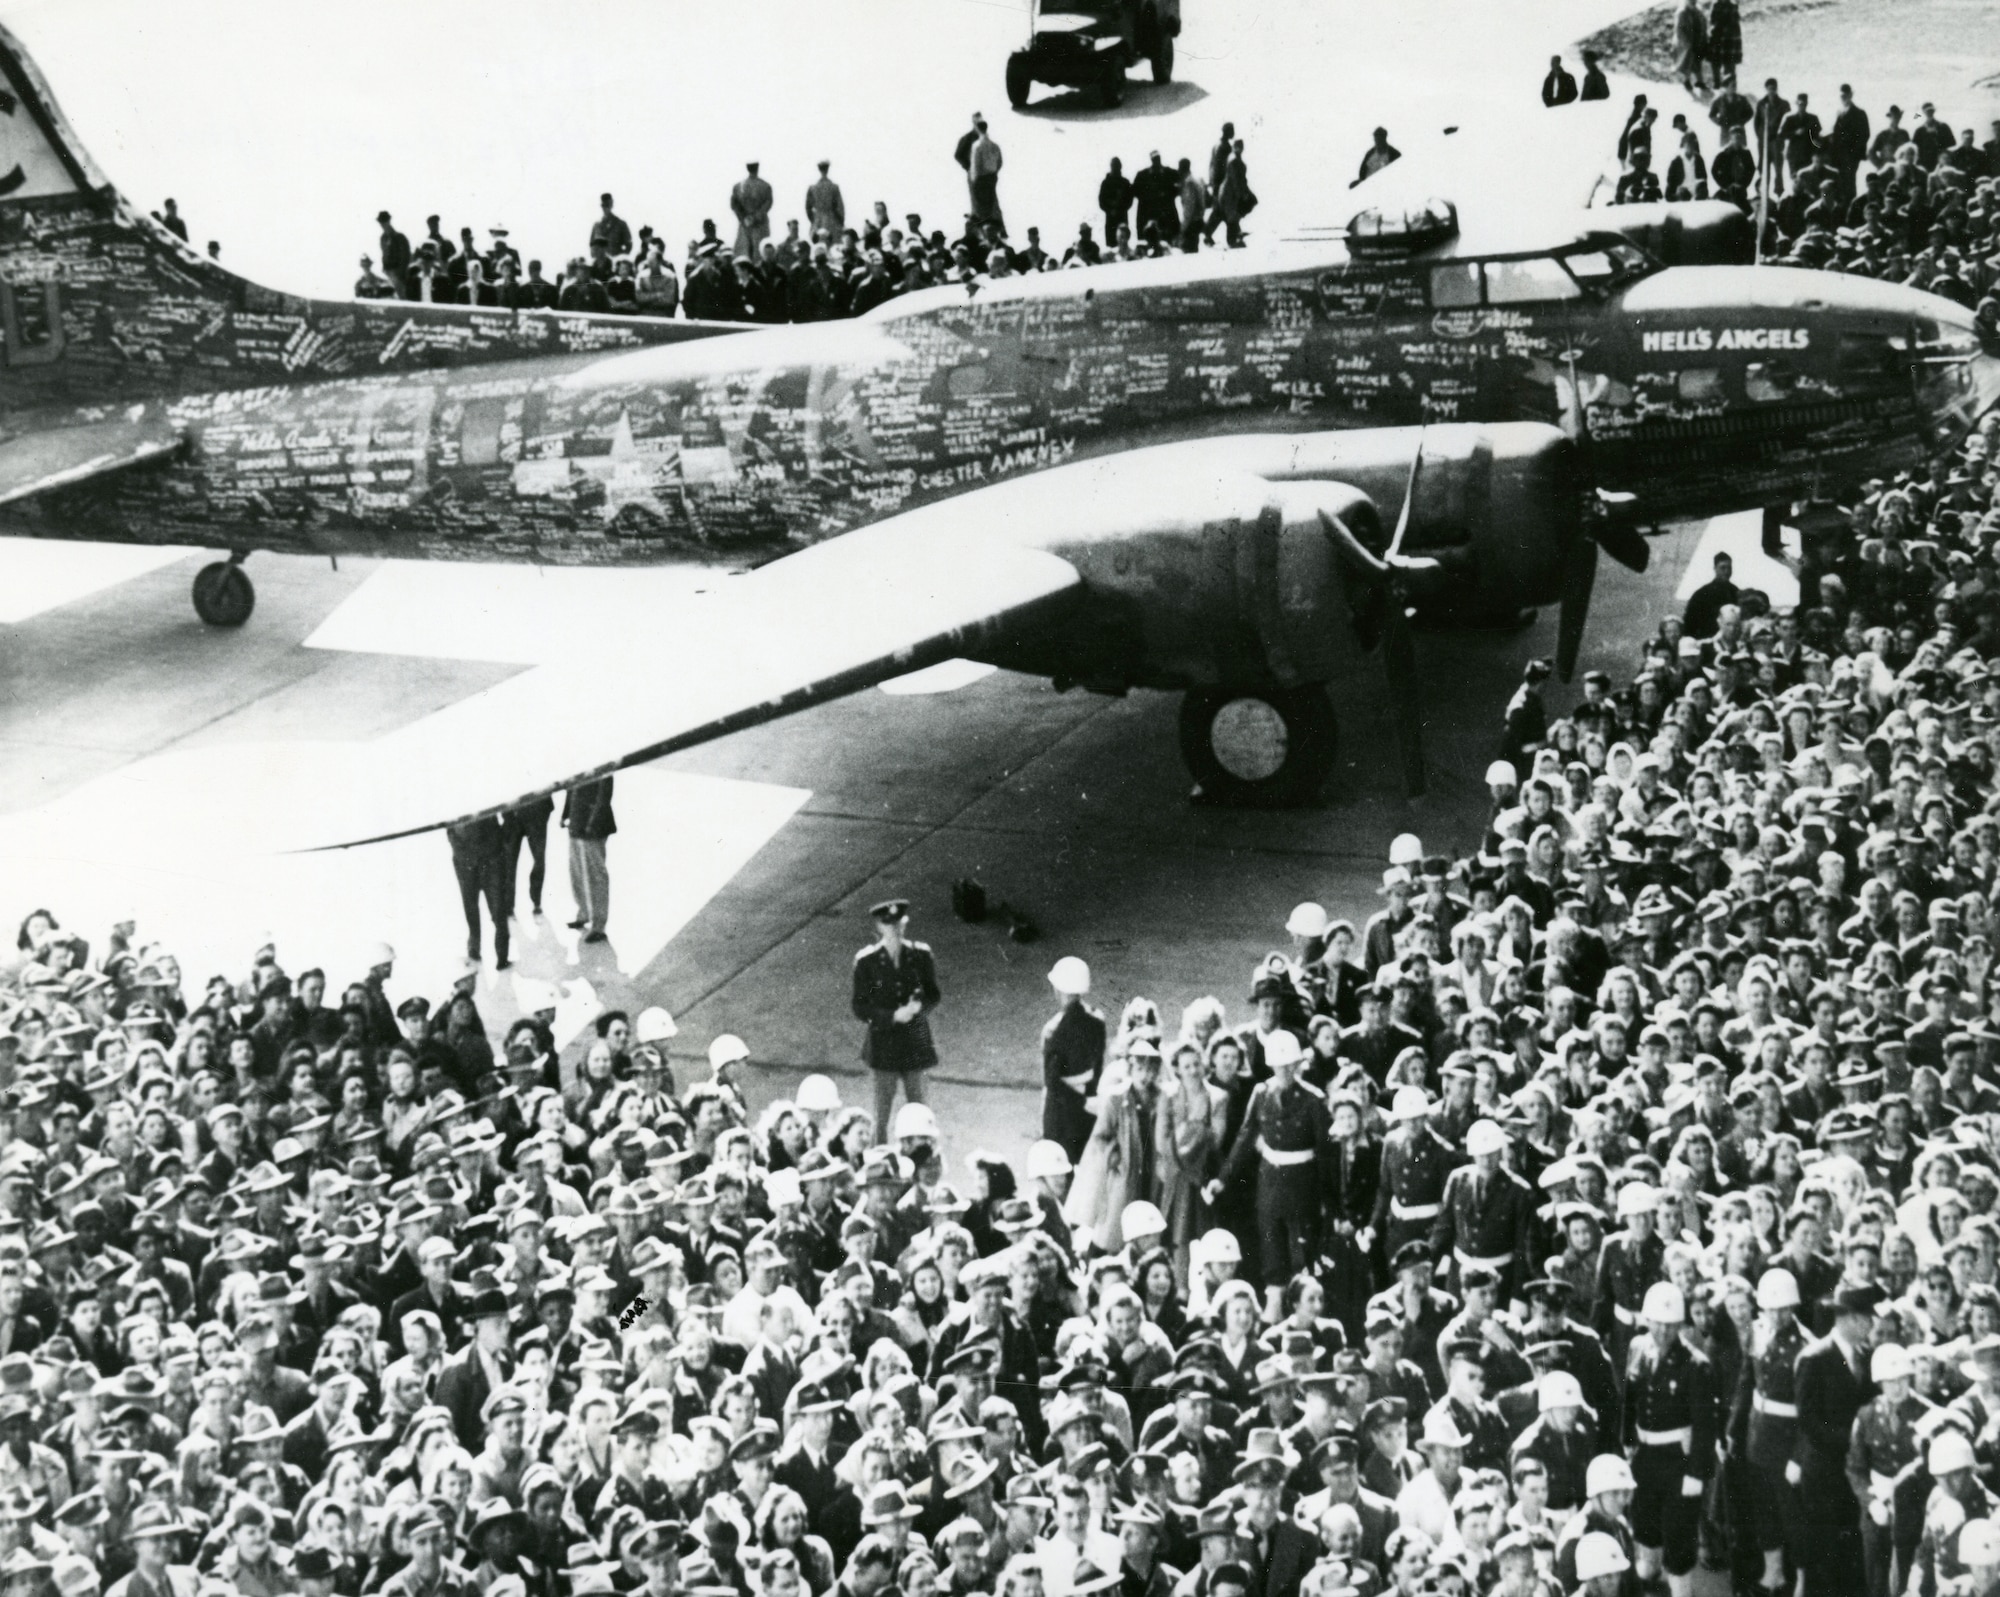 On May 13, 1943, the 303rd BG B-17F Hell’s Angels became the first heavy bomber to complete 25 combat missions over Europe, four days before the Memphis Belle’s crew.  After flying 48 combat missions, it returned to the US for a war bond tour, but not until 1944.